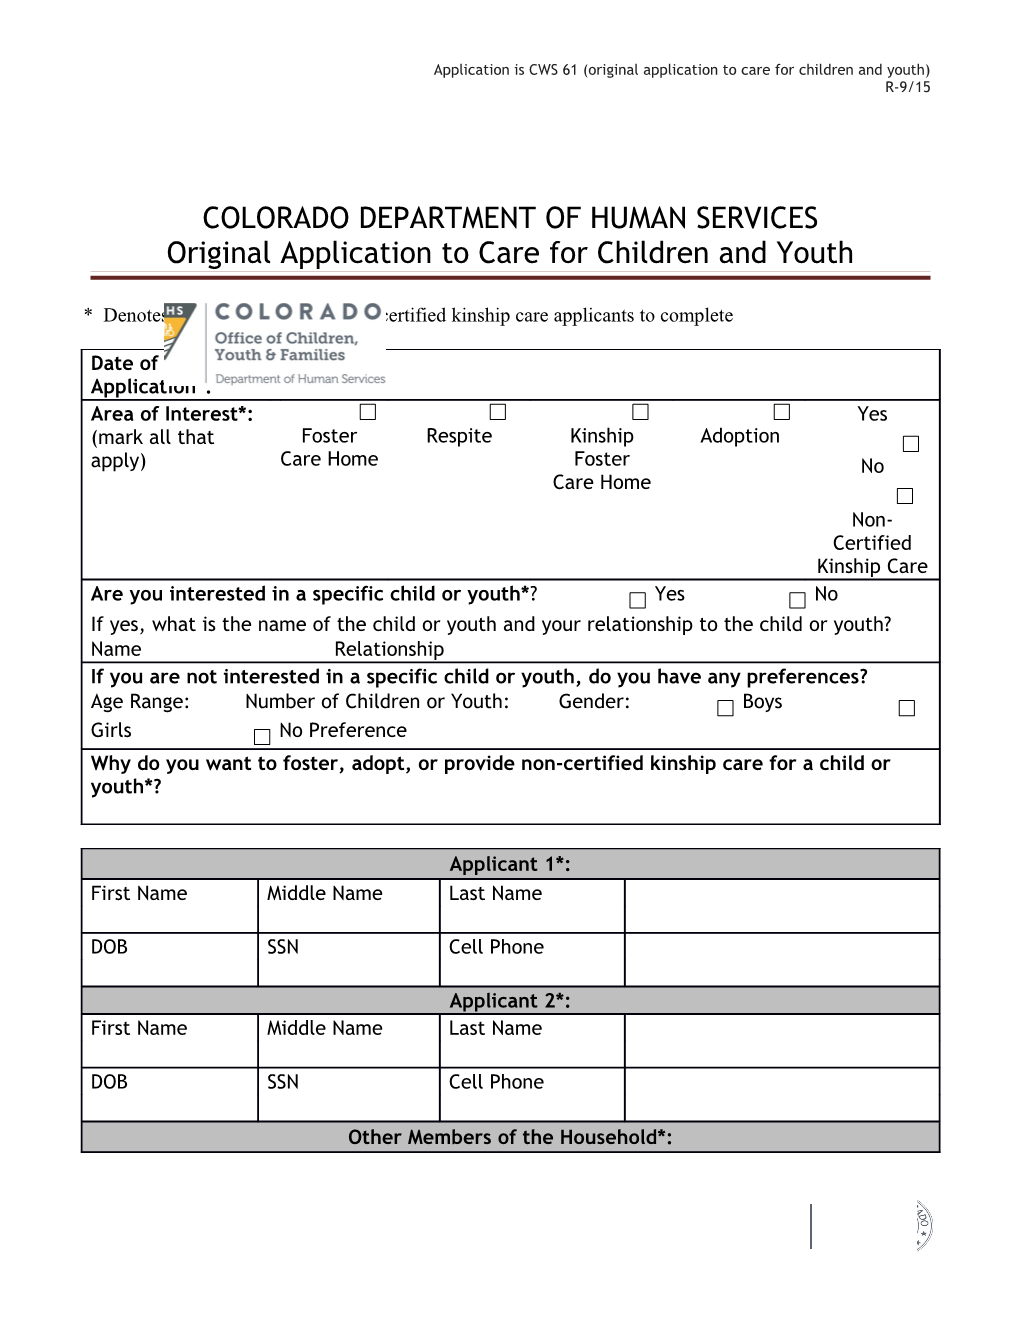 COLORADO DEPARTMENT of HUMAN SERVICES Original Application to Care for Children and Youth